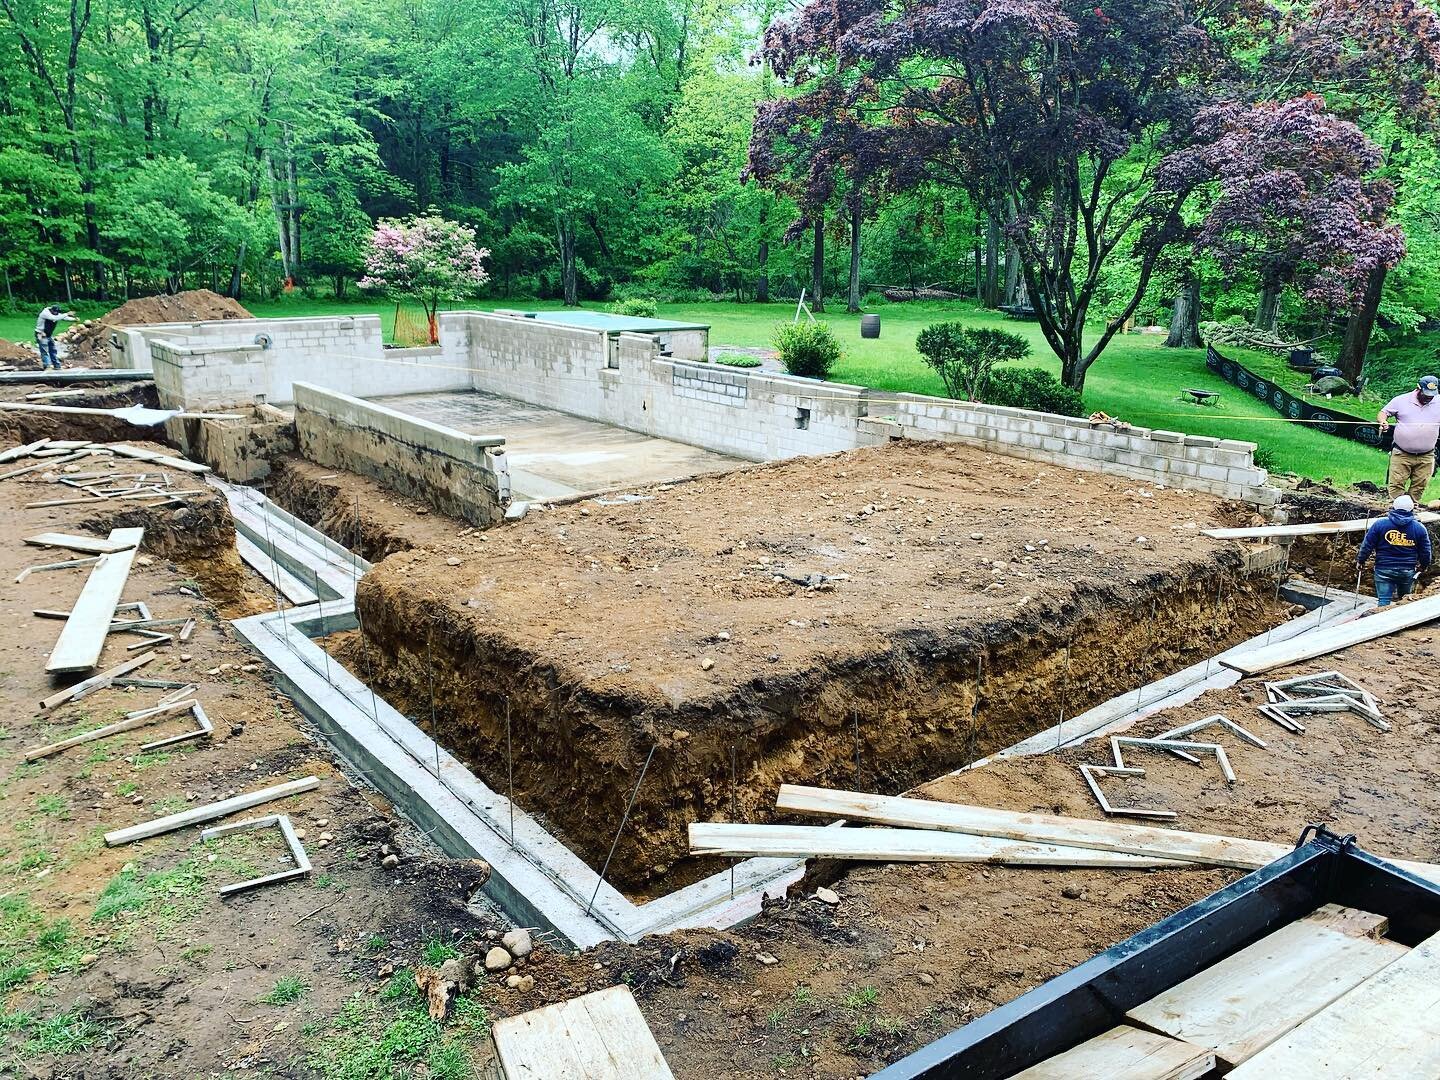 🚧 New foundation 🚧 for a beautiful home being built in #newcanaan #architecture #designers #architects #carpentry #modularhome #generalcontractor #builders #crafters #carpentry #foundation #concrete #structure